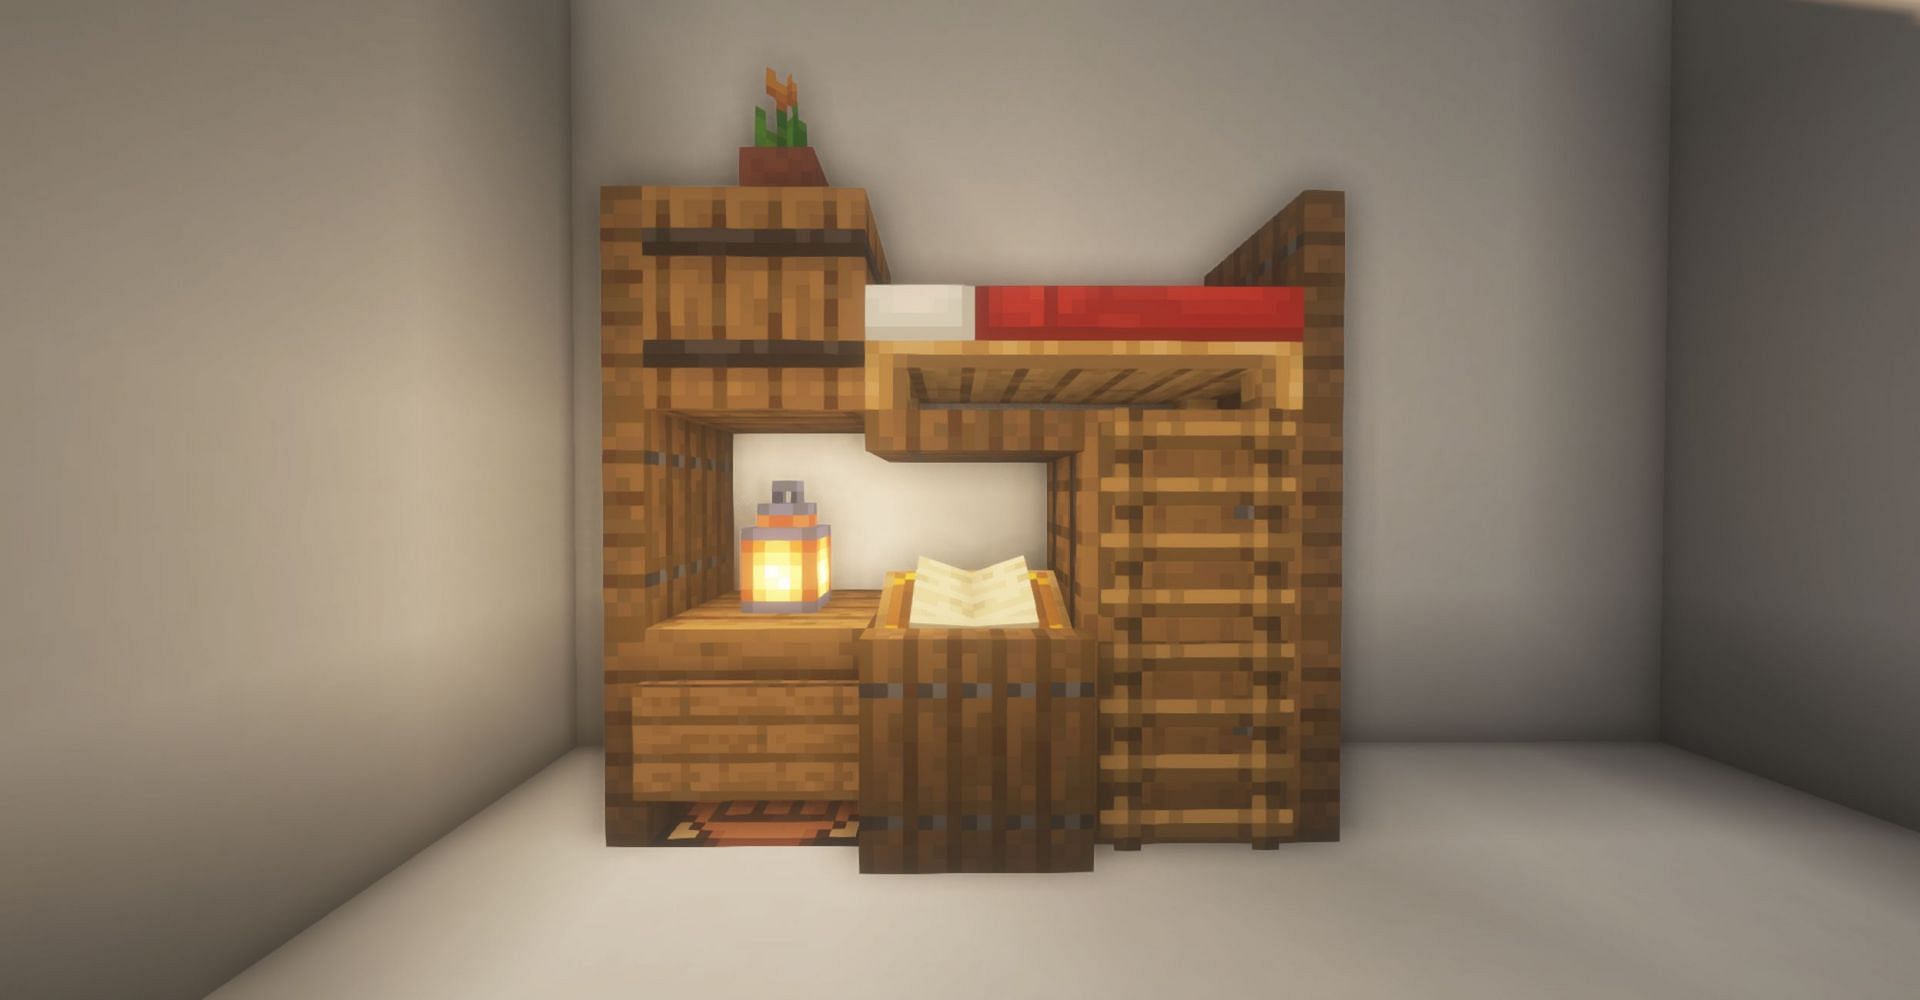 This design is pleasing while retaining a crafting table for function (Image via u/HamstersForAll, Reddit)